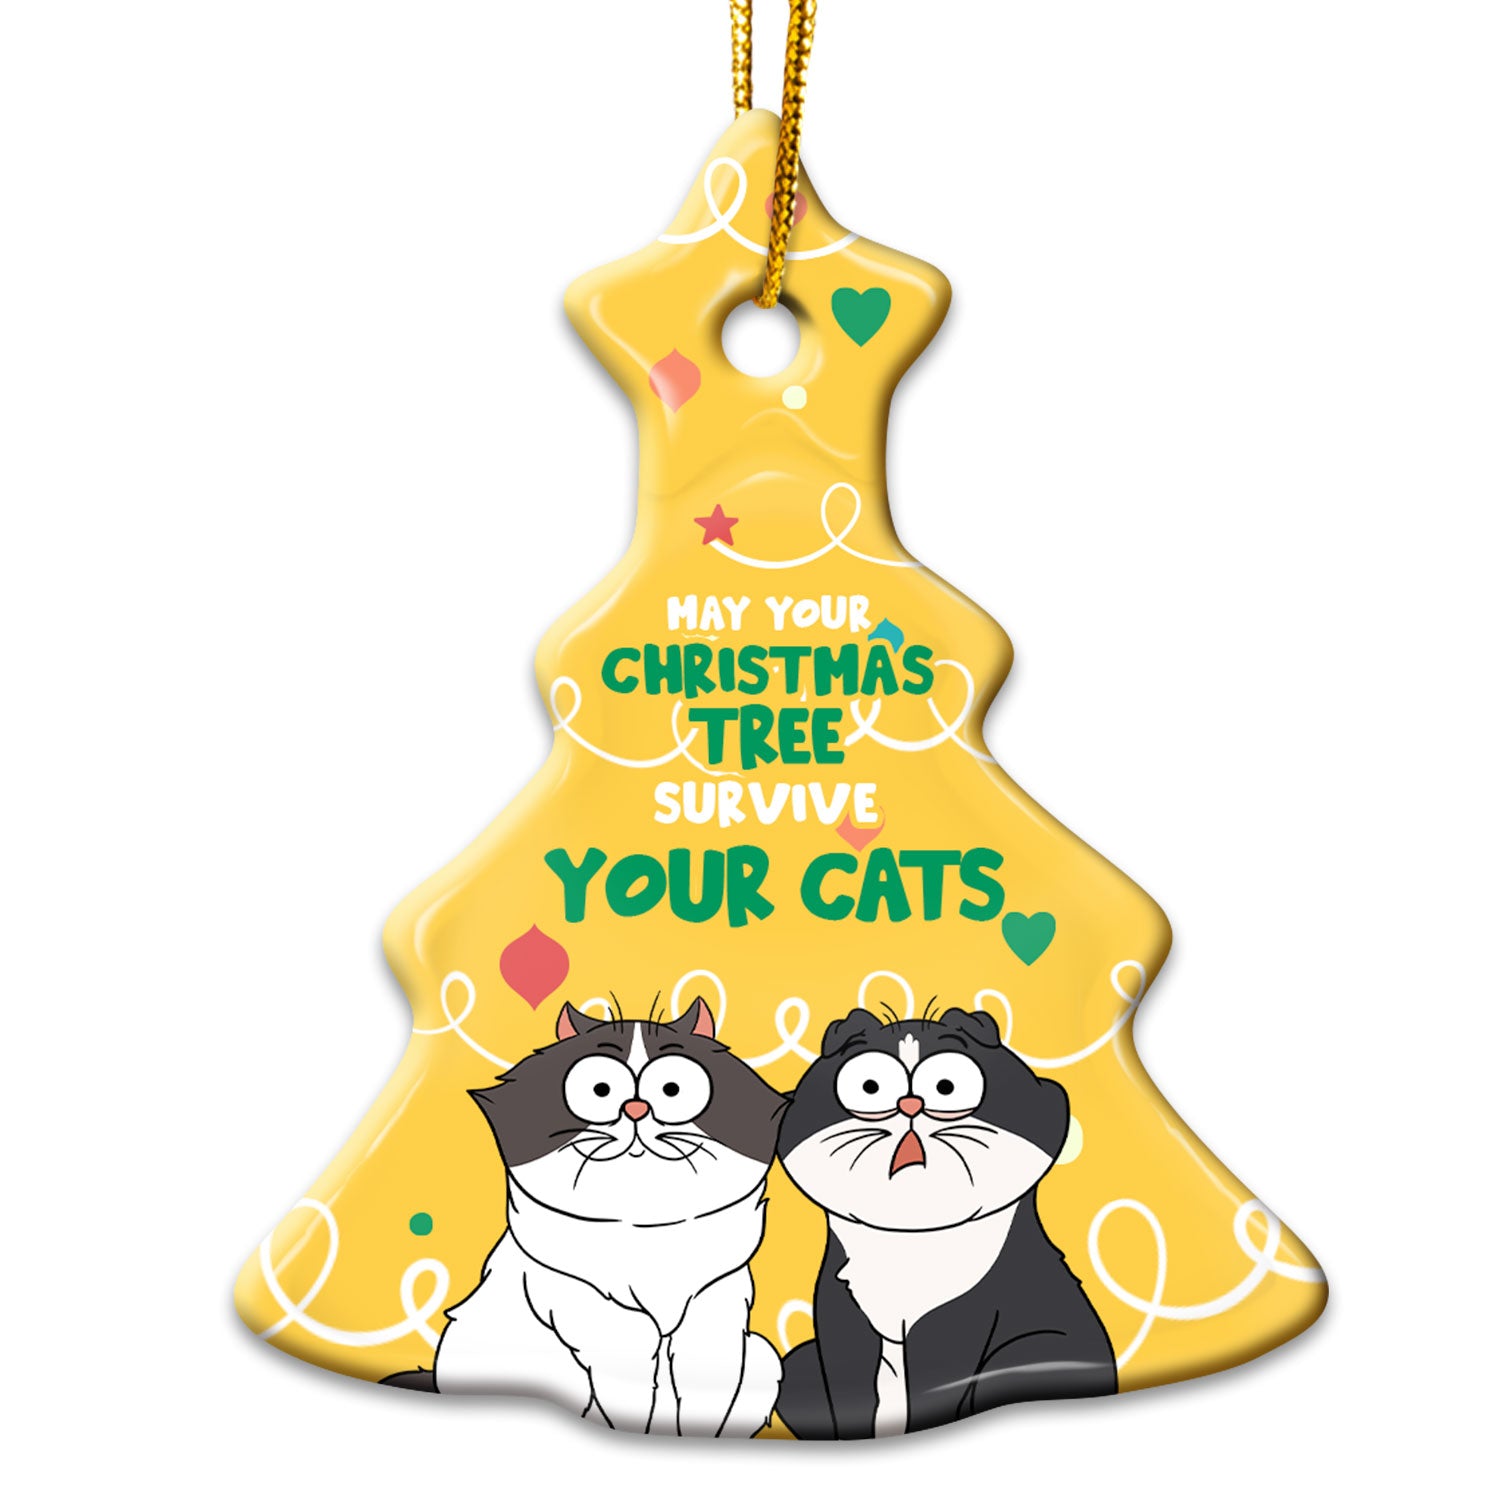 May Your Christmas Tree Survive - Gift For Cat Lovers - Personalized Tree Ceramic Ornament